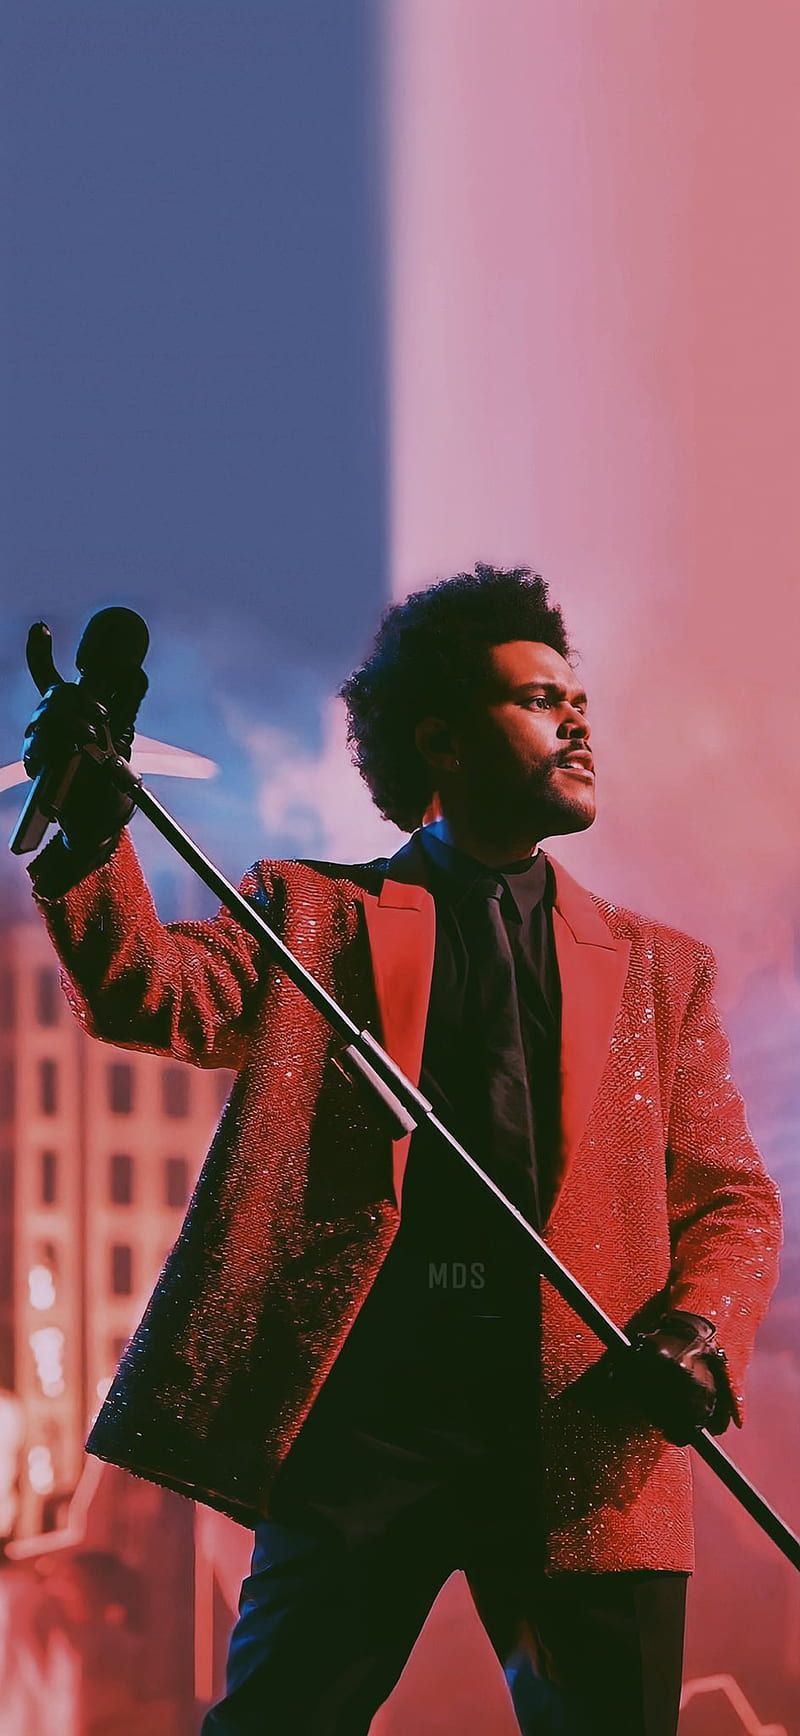 The Weeknd wallpaper for iPhone and Android - The Weeknd